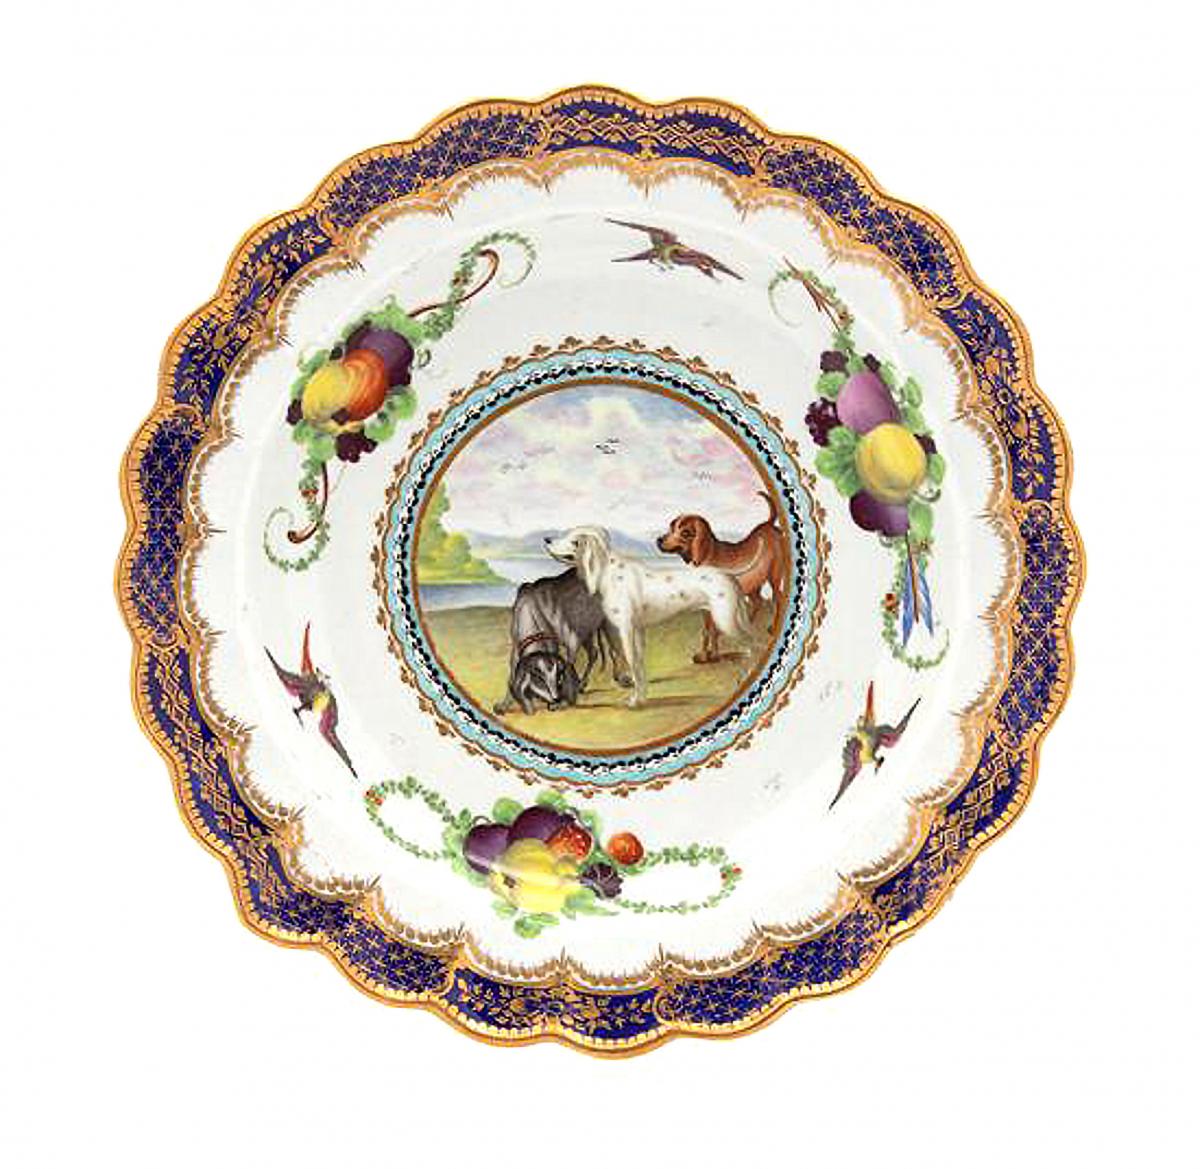 First Period Worcester Porcelain Aesop's Fable Plate, Lord Henry Thynne Pattern